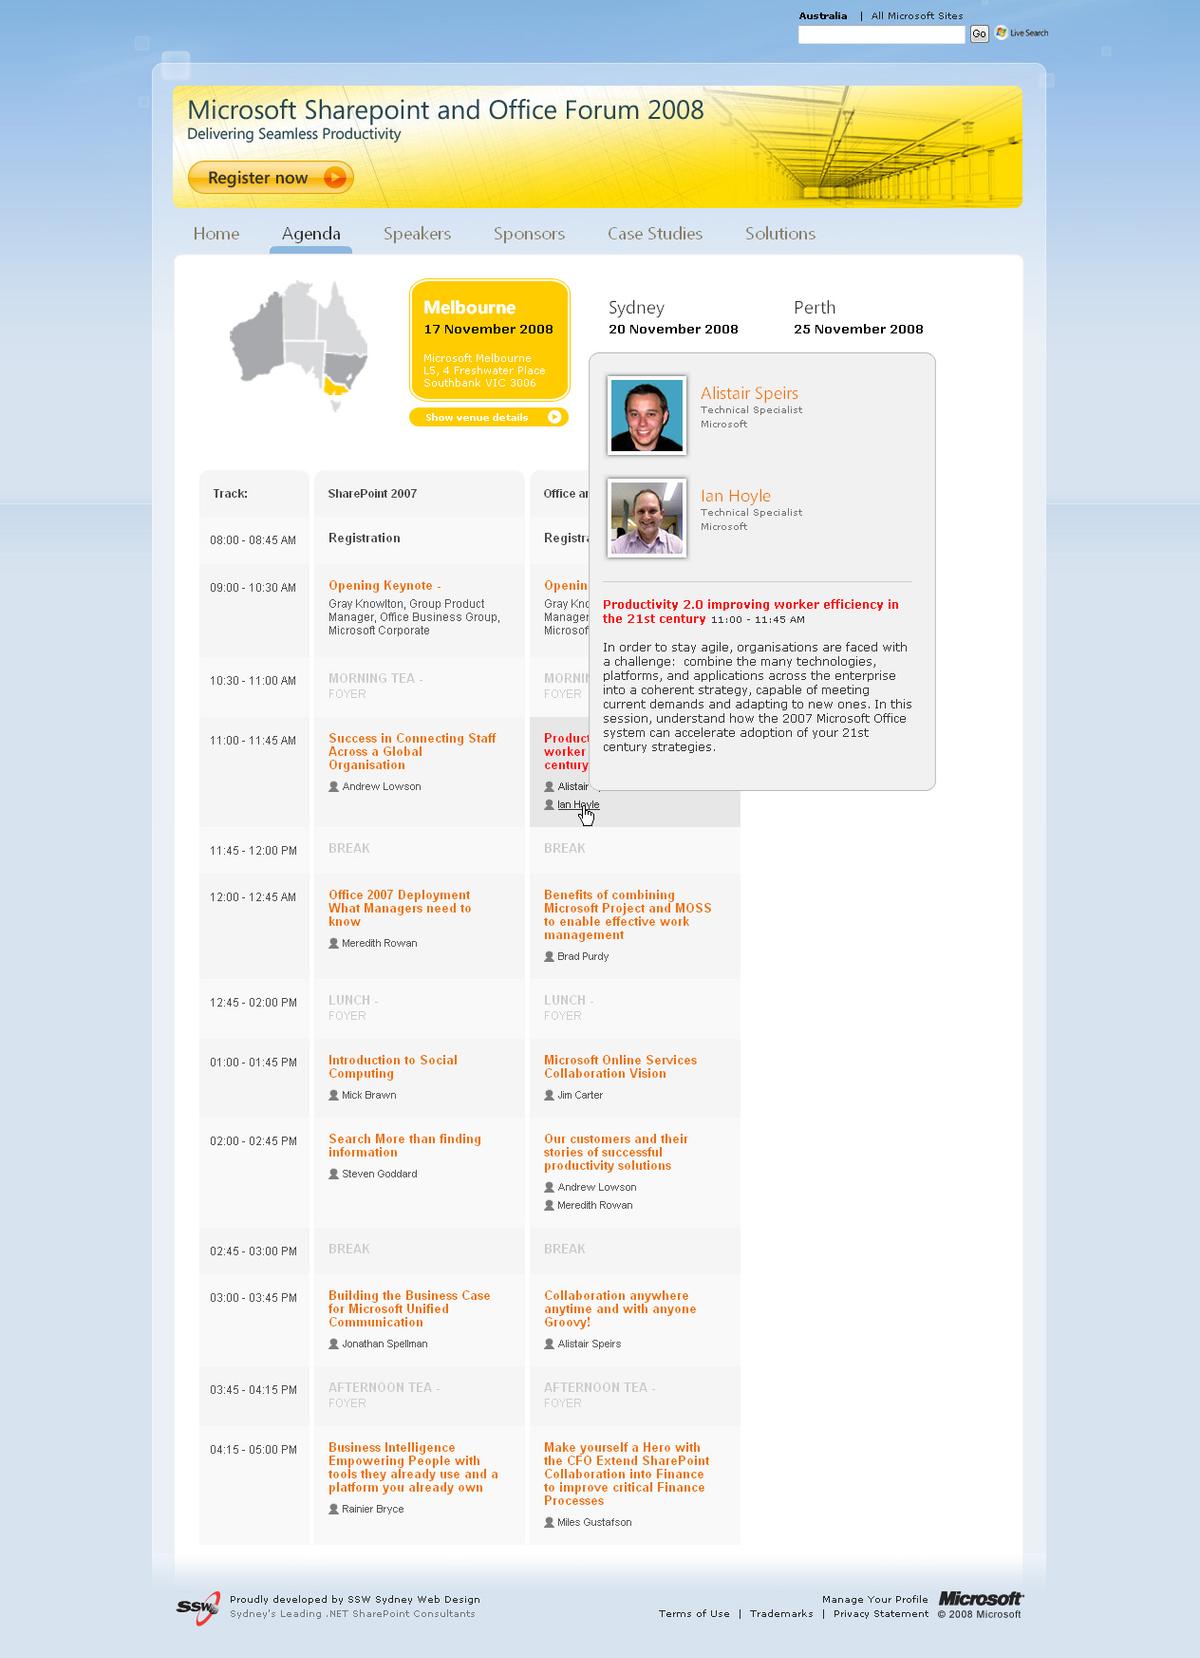 The Agenda page with speaker and presentation information displayed